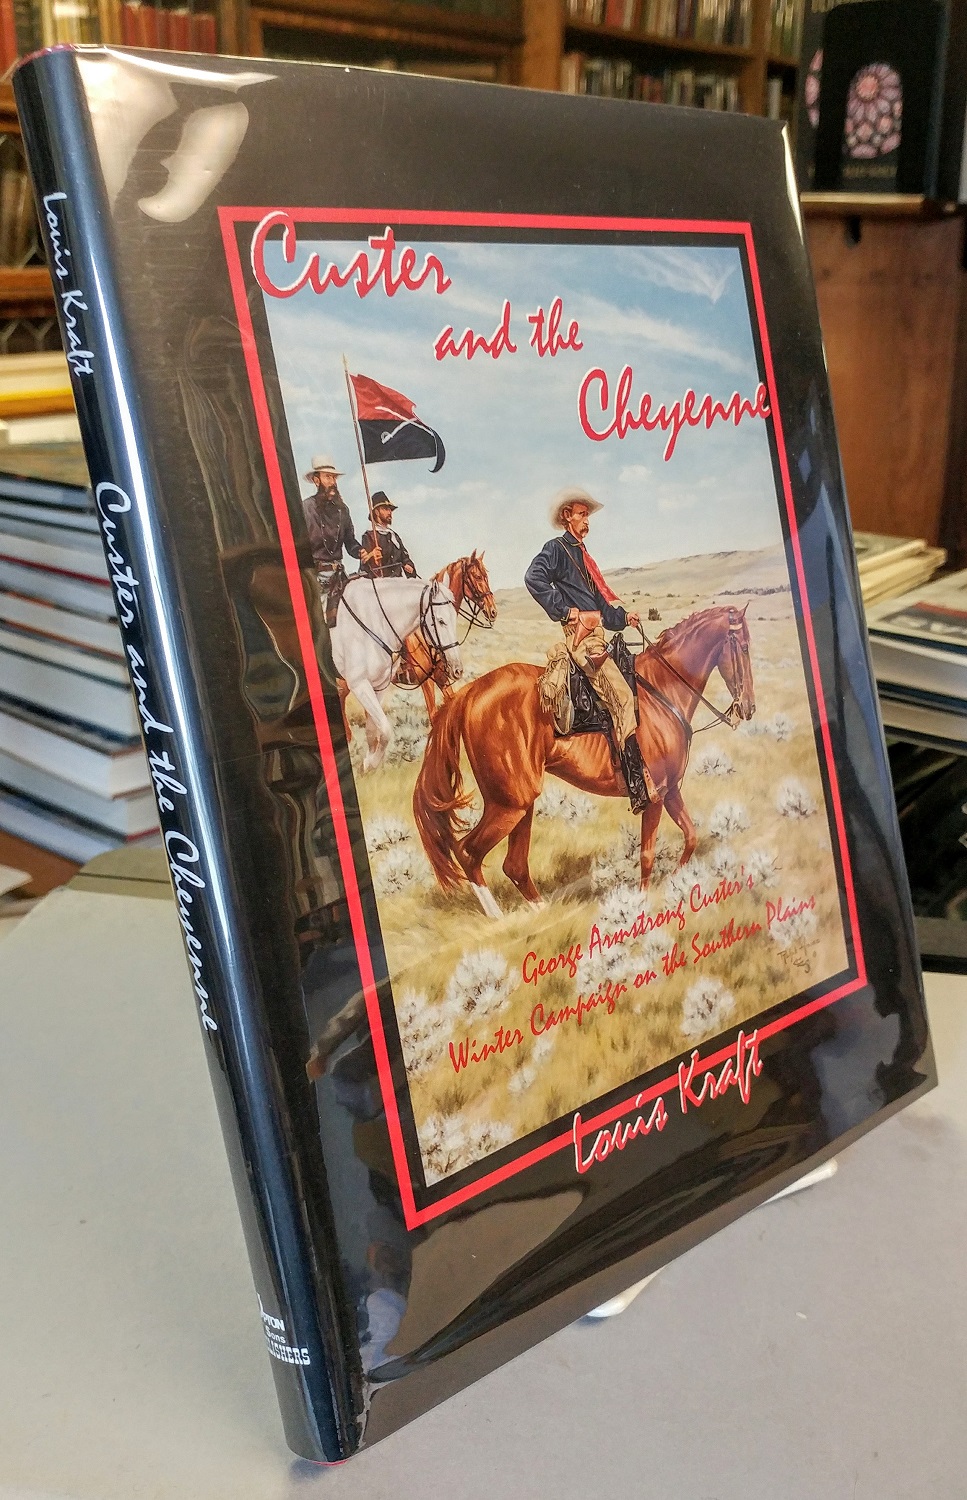 Custer and the Cheyenne. George Armstrong Custer's Winter Campaign on the Southern Plains - KRAFT, Louis